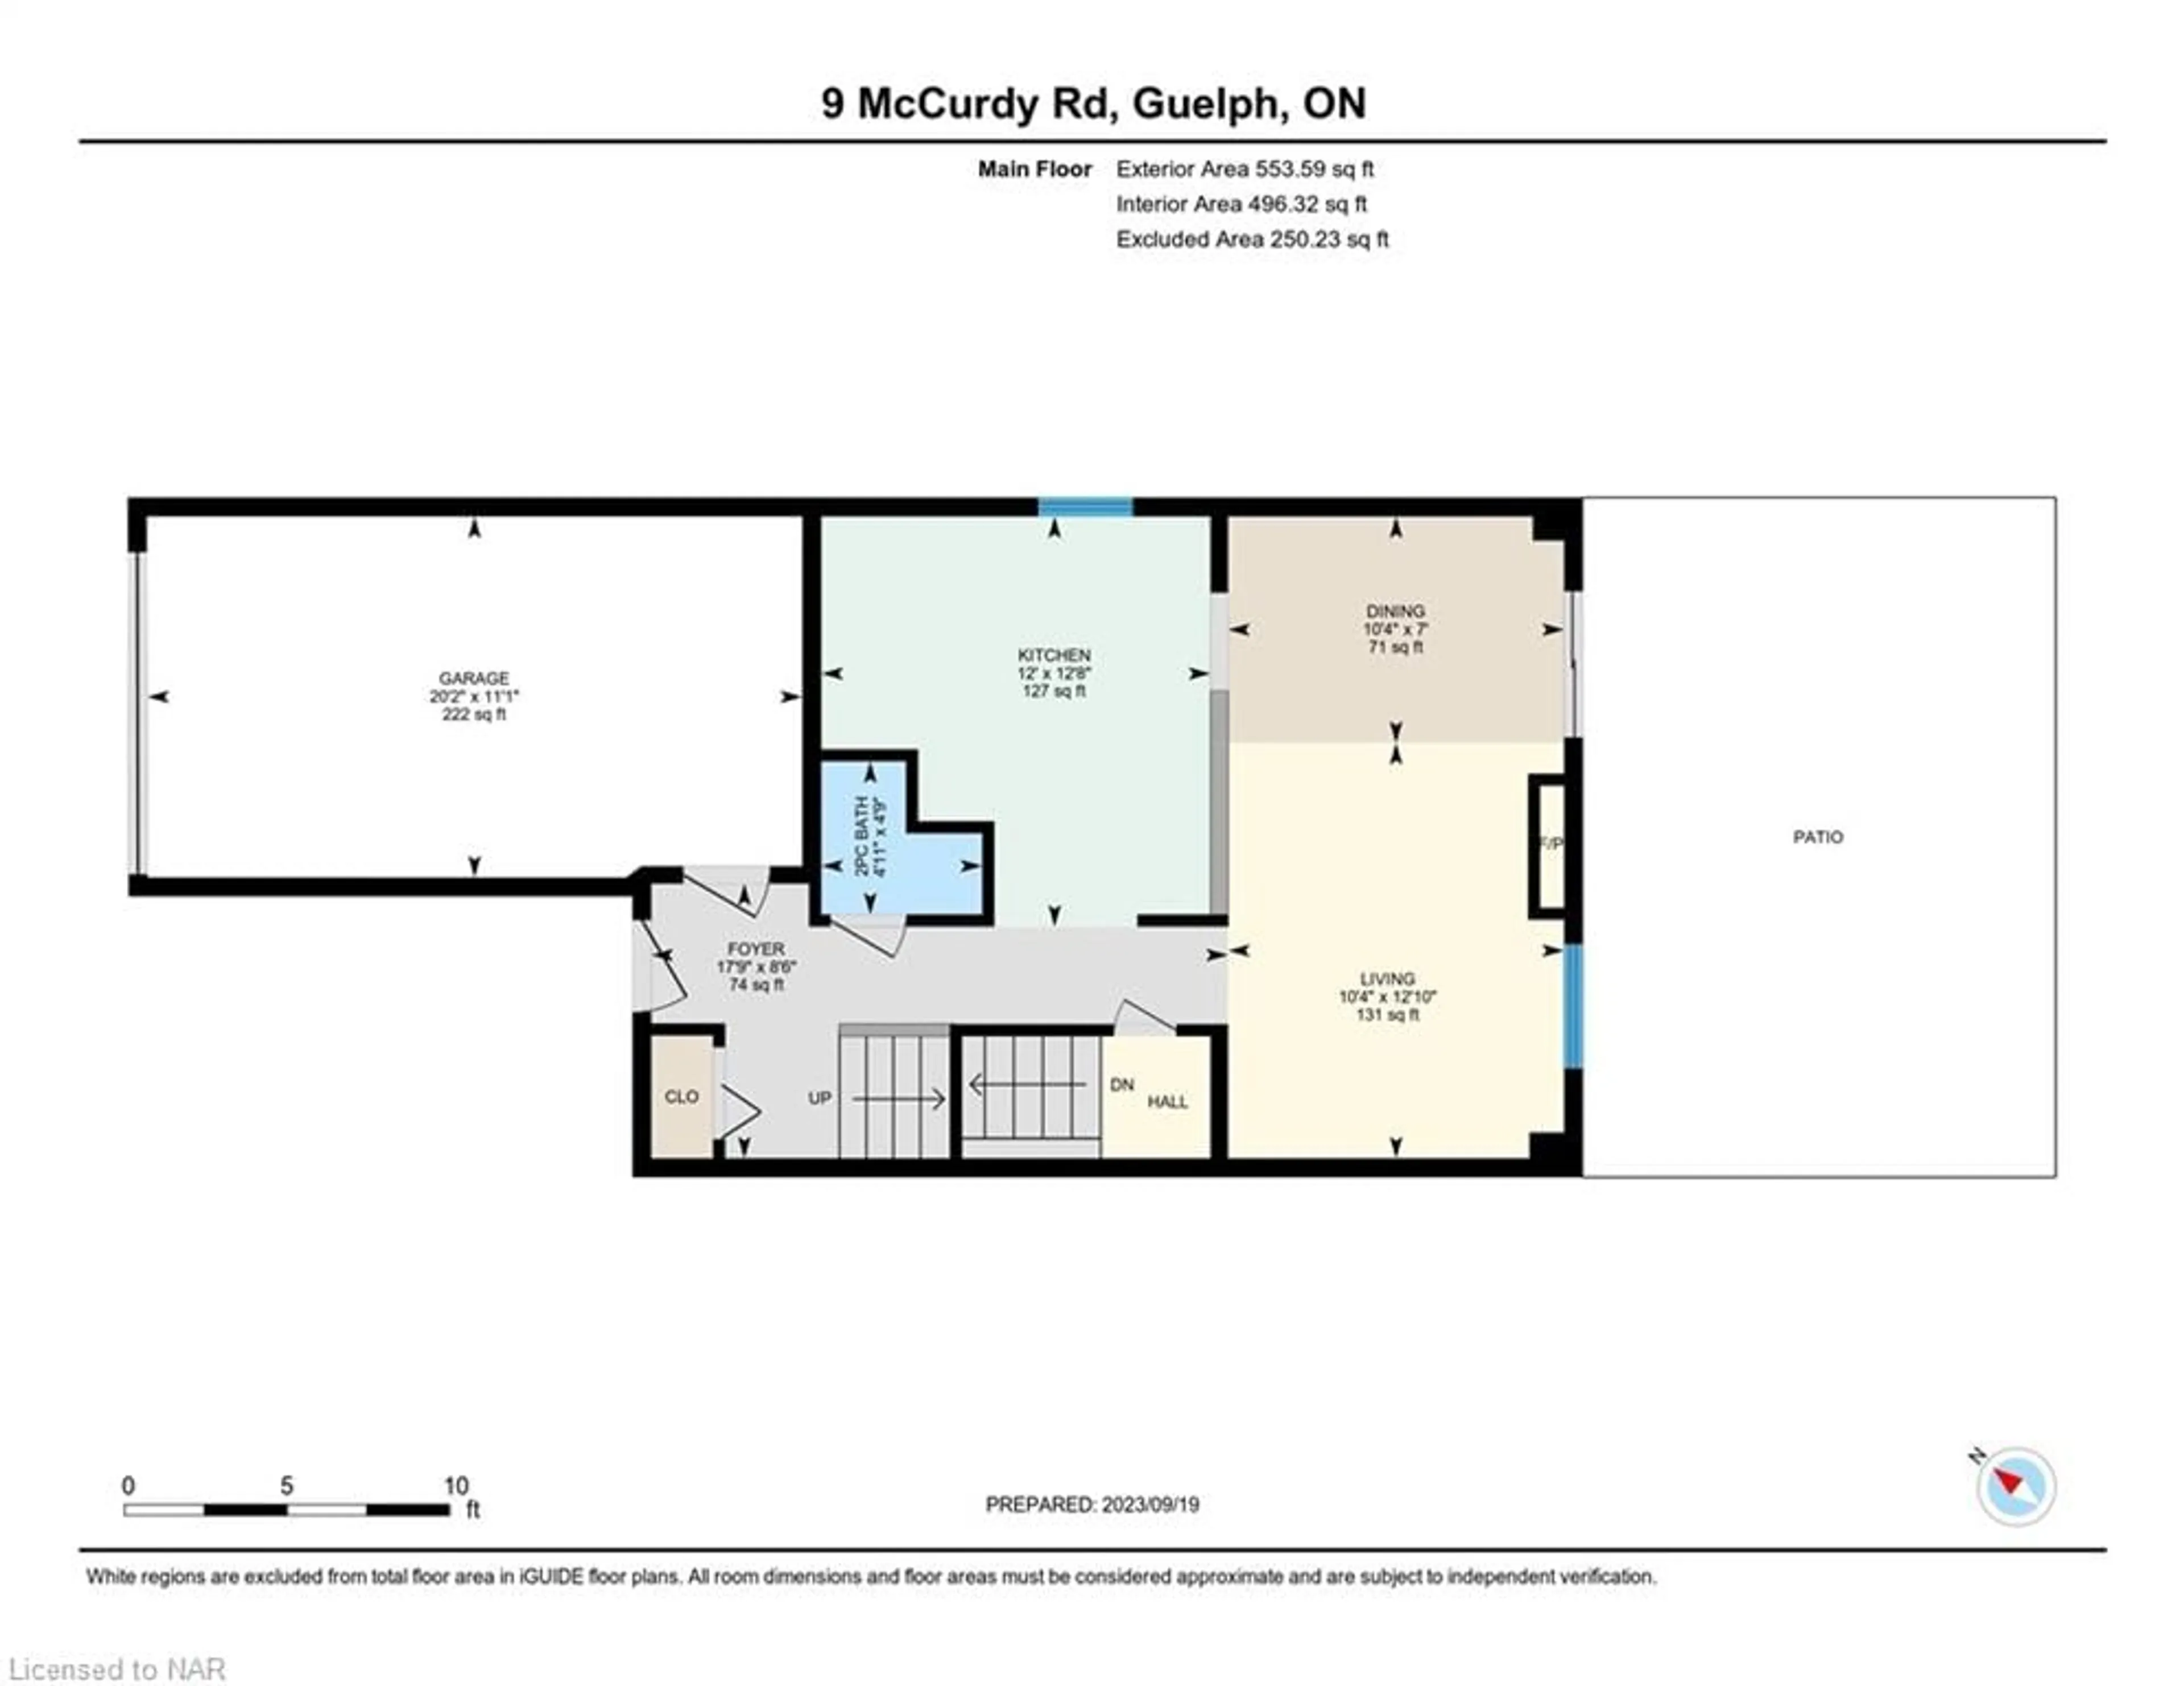 Floor plan for 9 Mccurdy Rd, Guelph Ontario N1G 4Y6